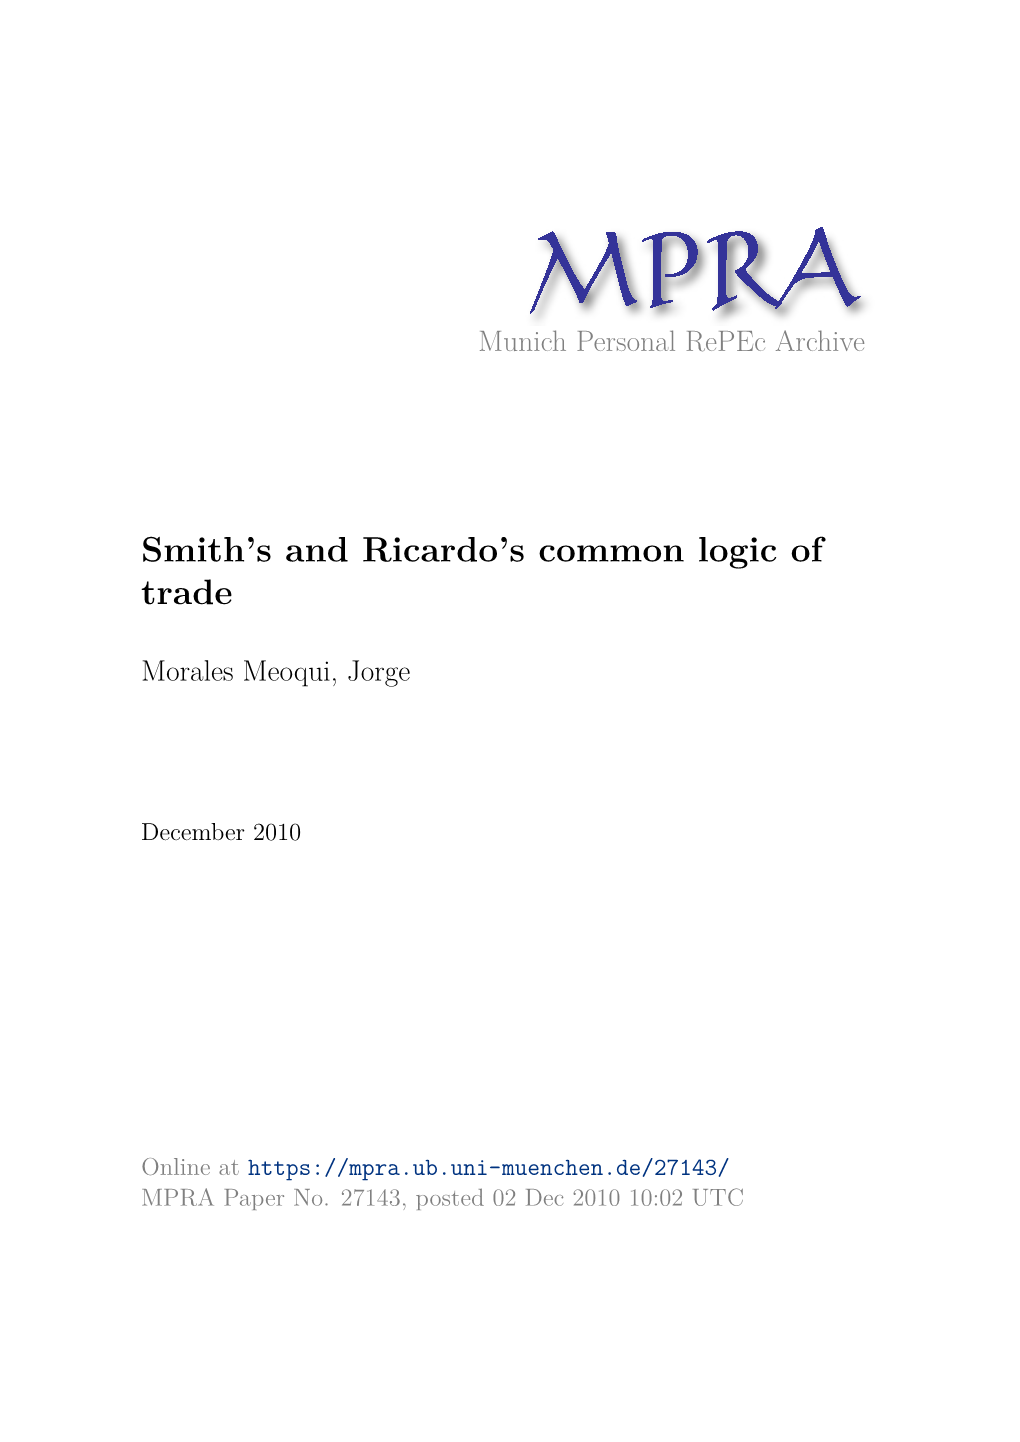 Smith's and Ricardo's Common Logic of Trade